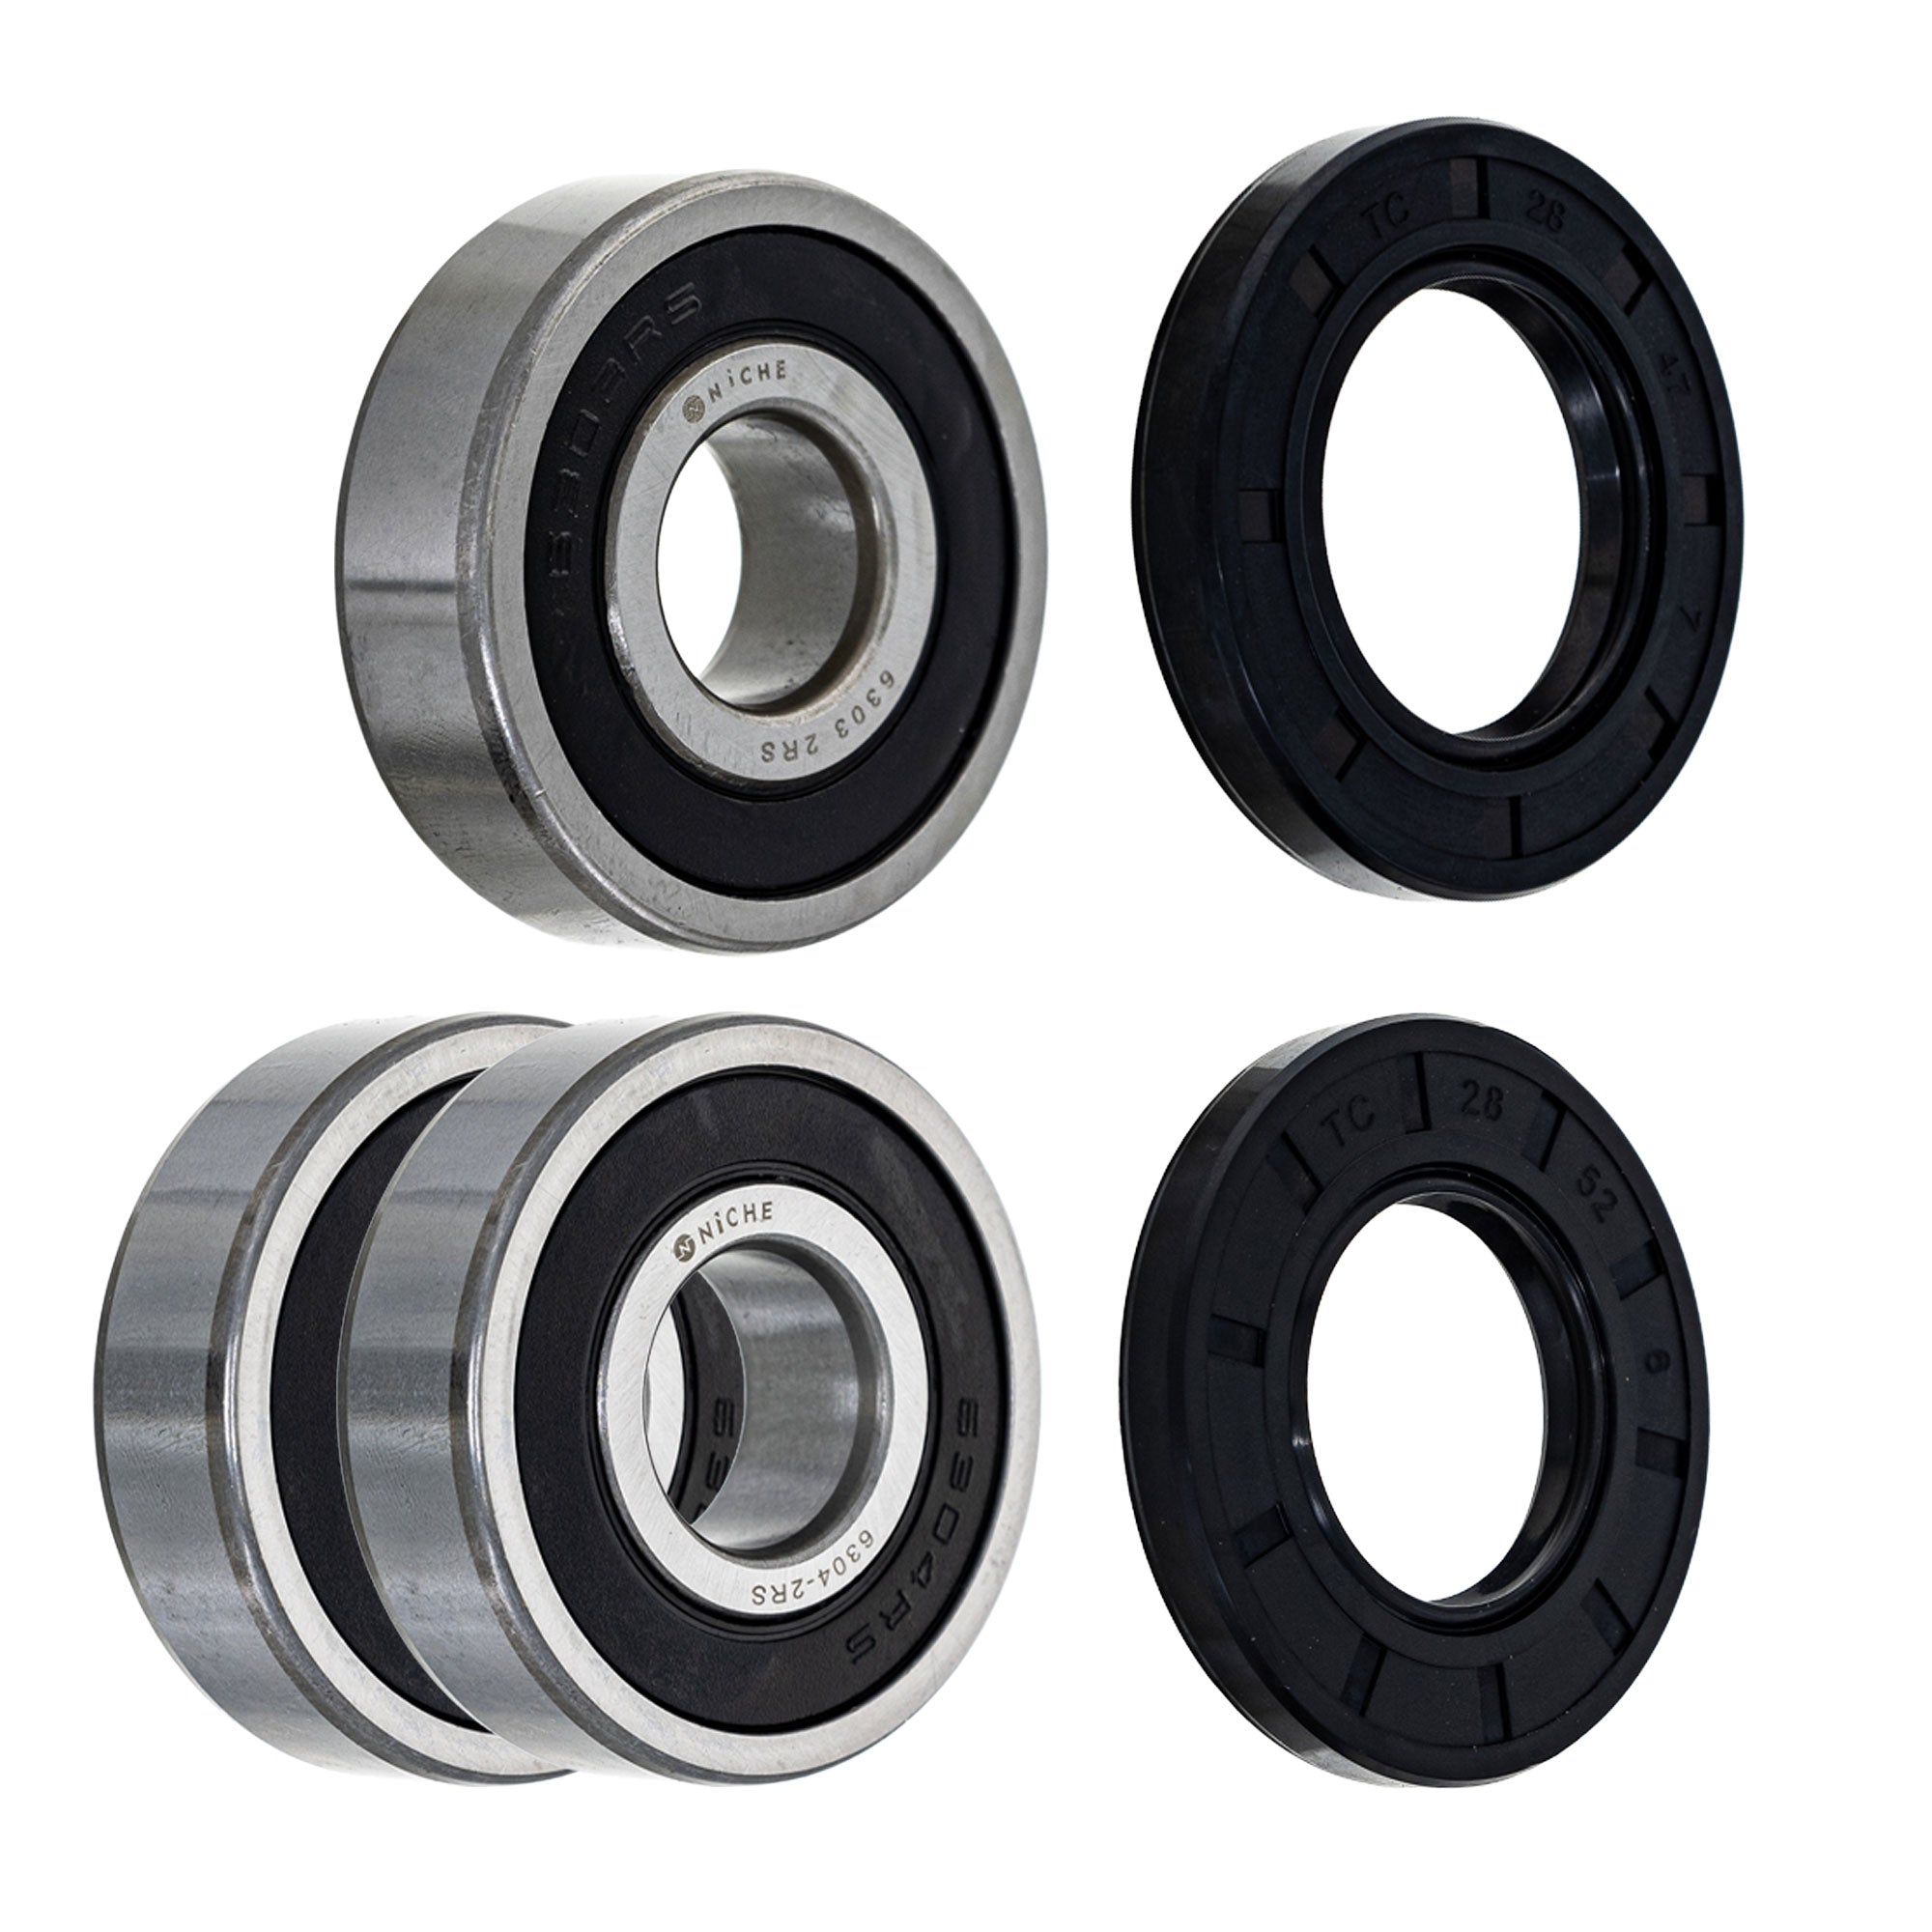 Wheel Bearing Seal Kit for zOTHER XS500 RD400 NICHE MK1008895